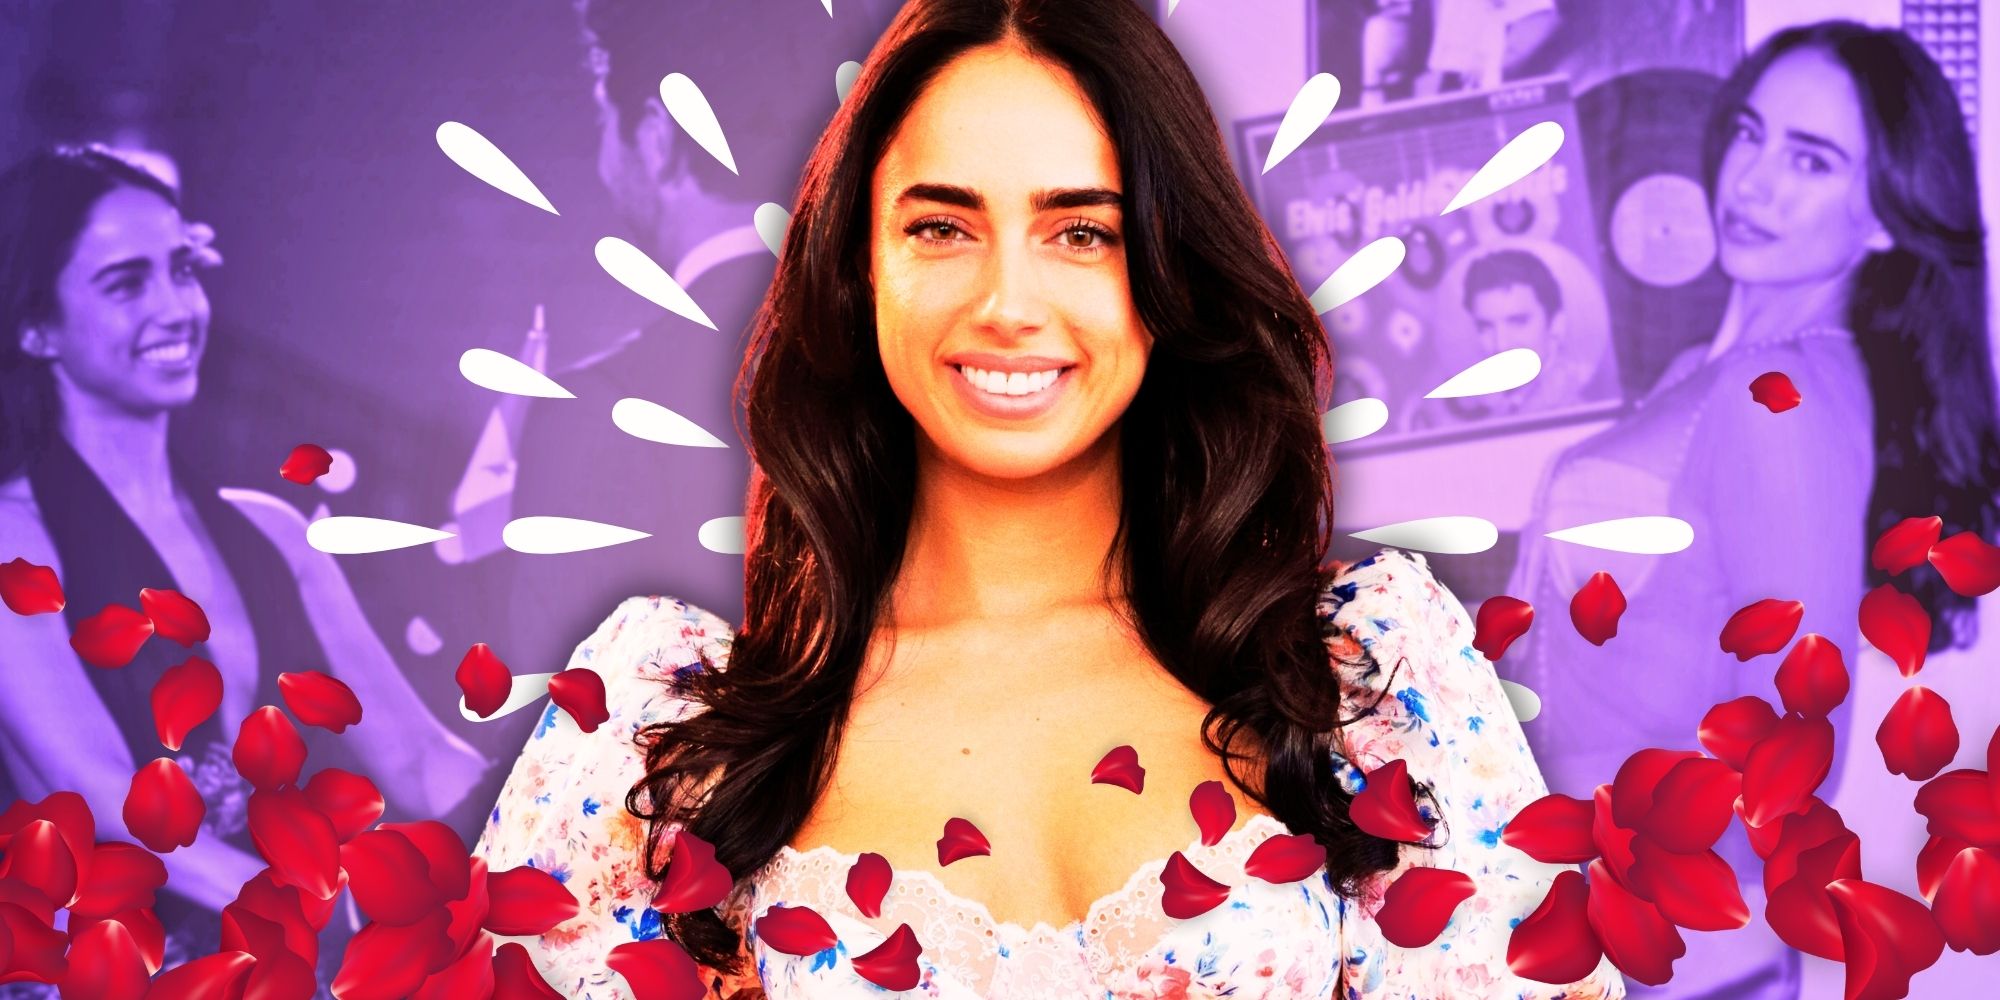 The Bachelor Season 28's Maria Georgas with flower petals lavender background